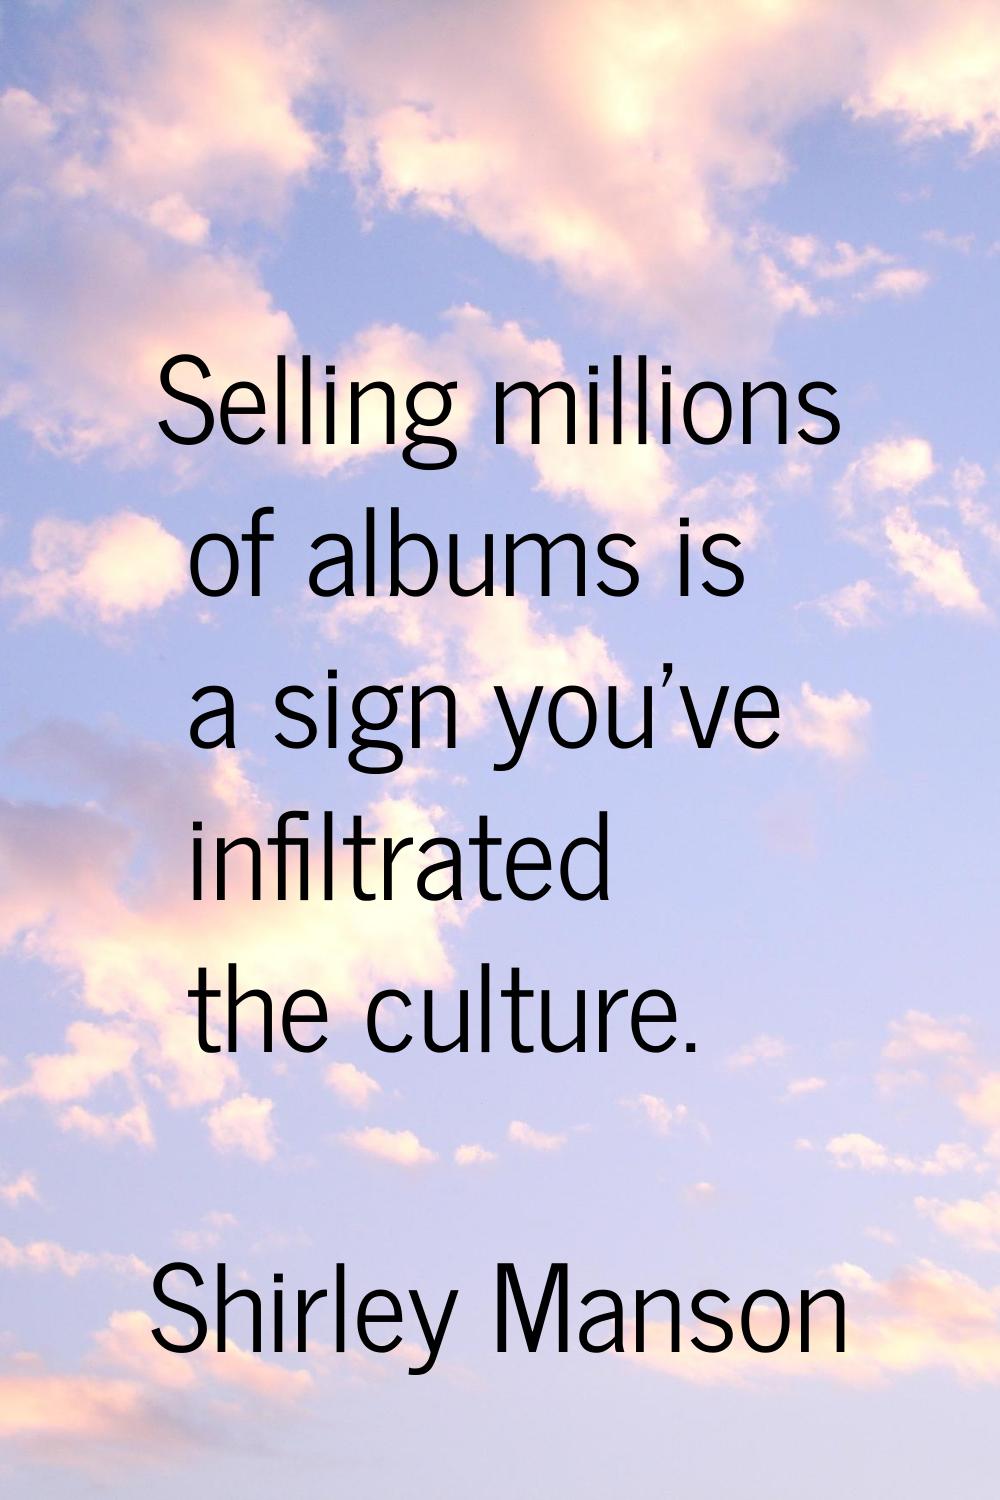 Selling millions of albums is a sign you've infiltrated the culture.